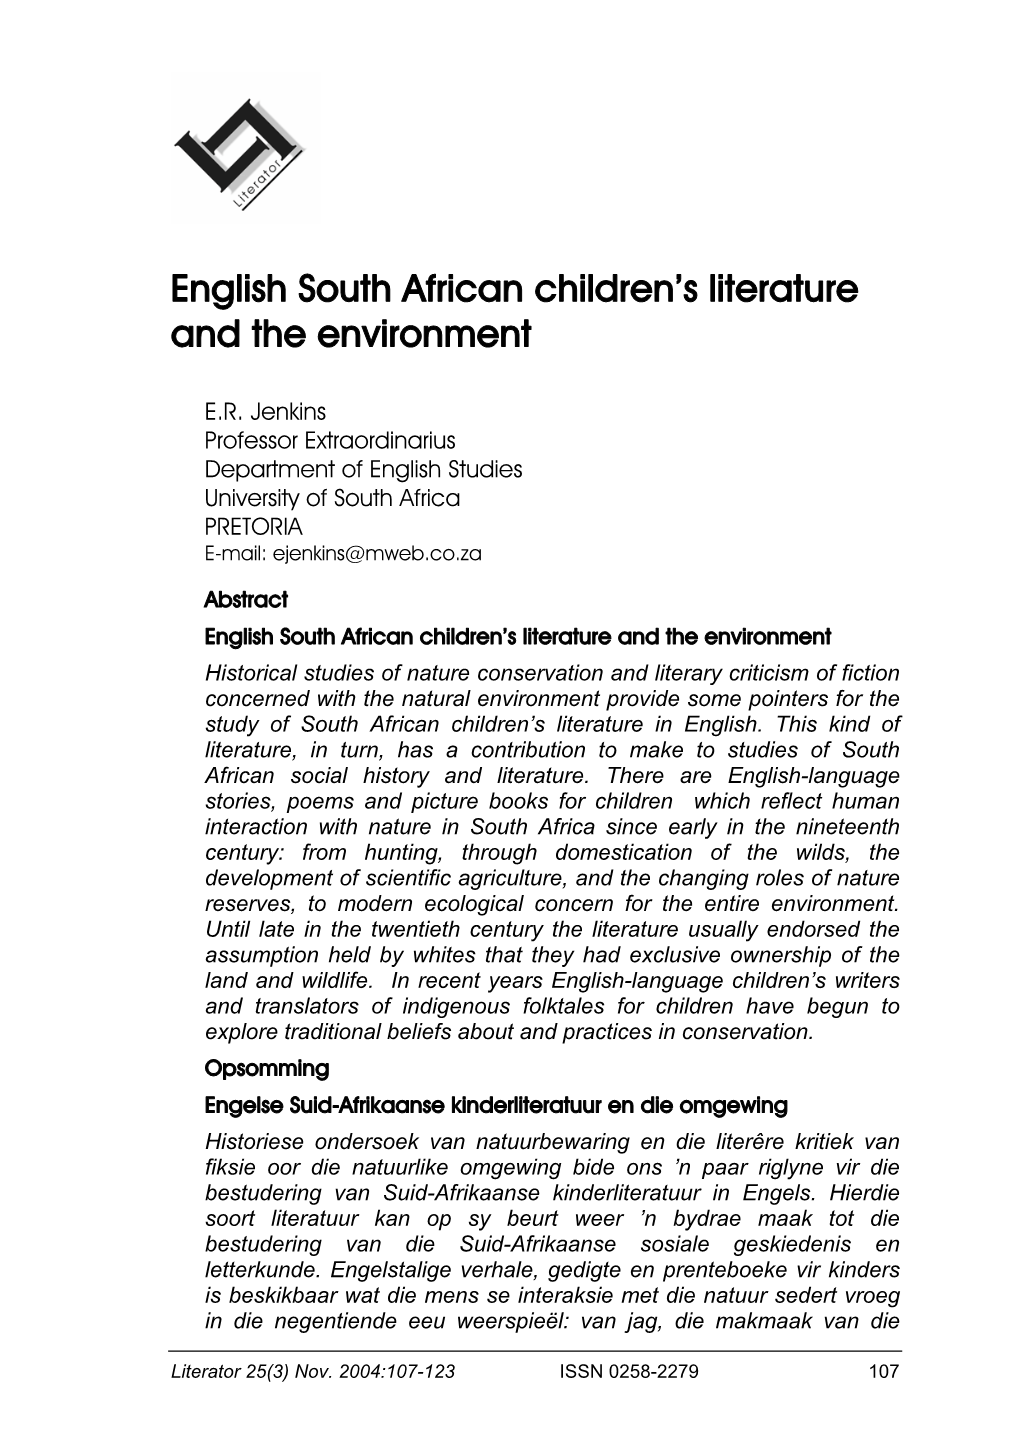 English South African Children's Literature and the Environment